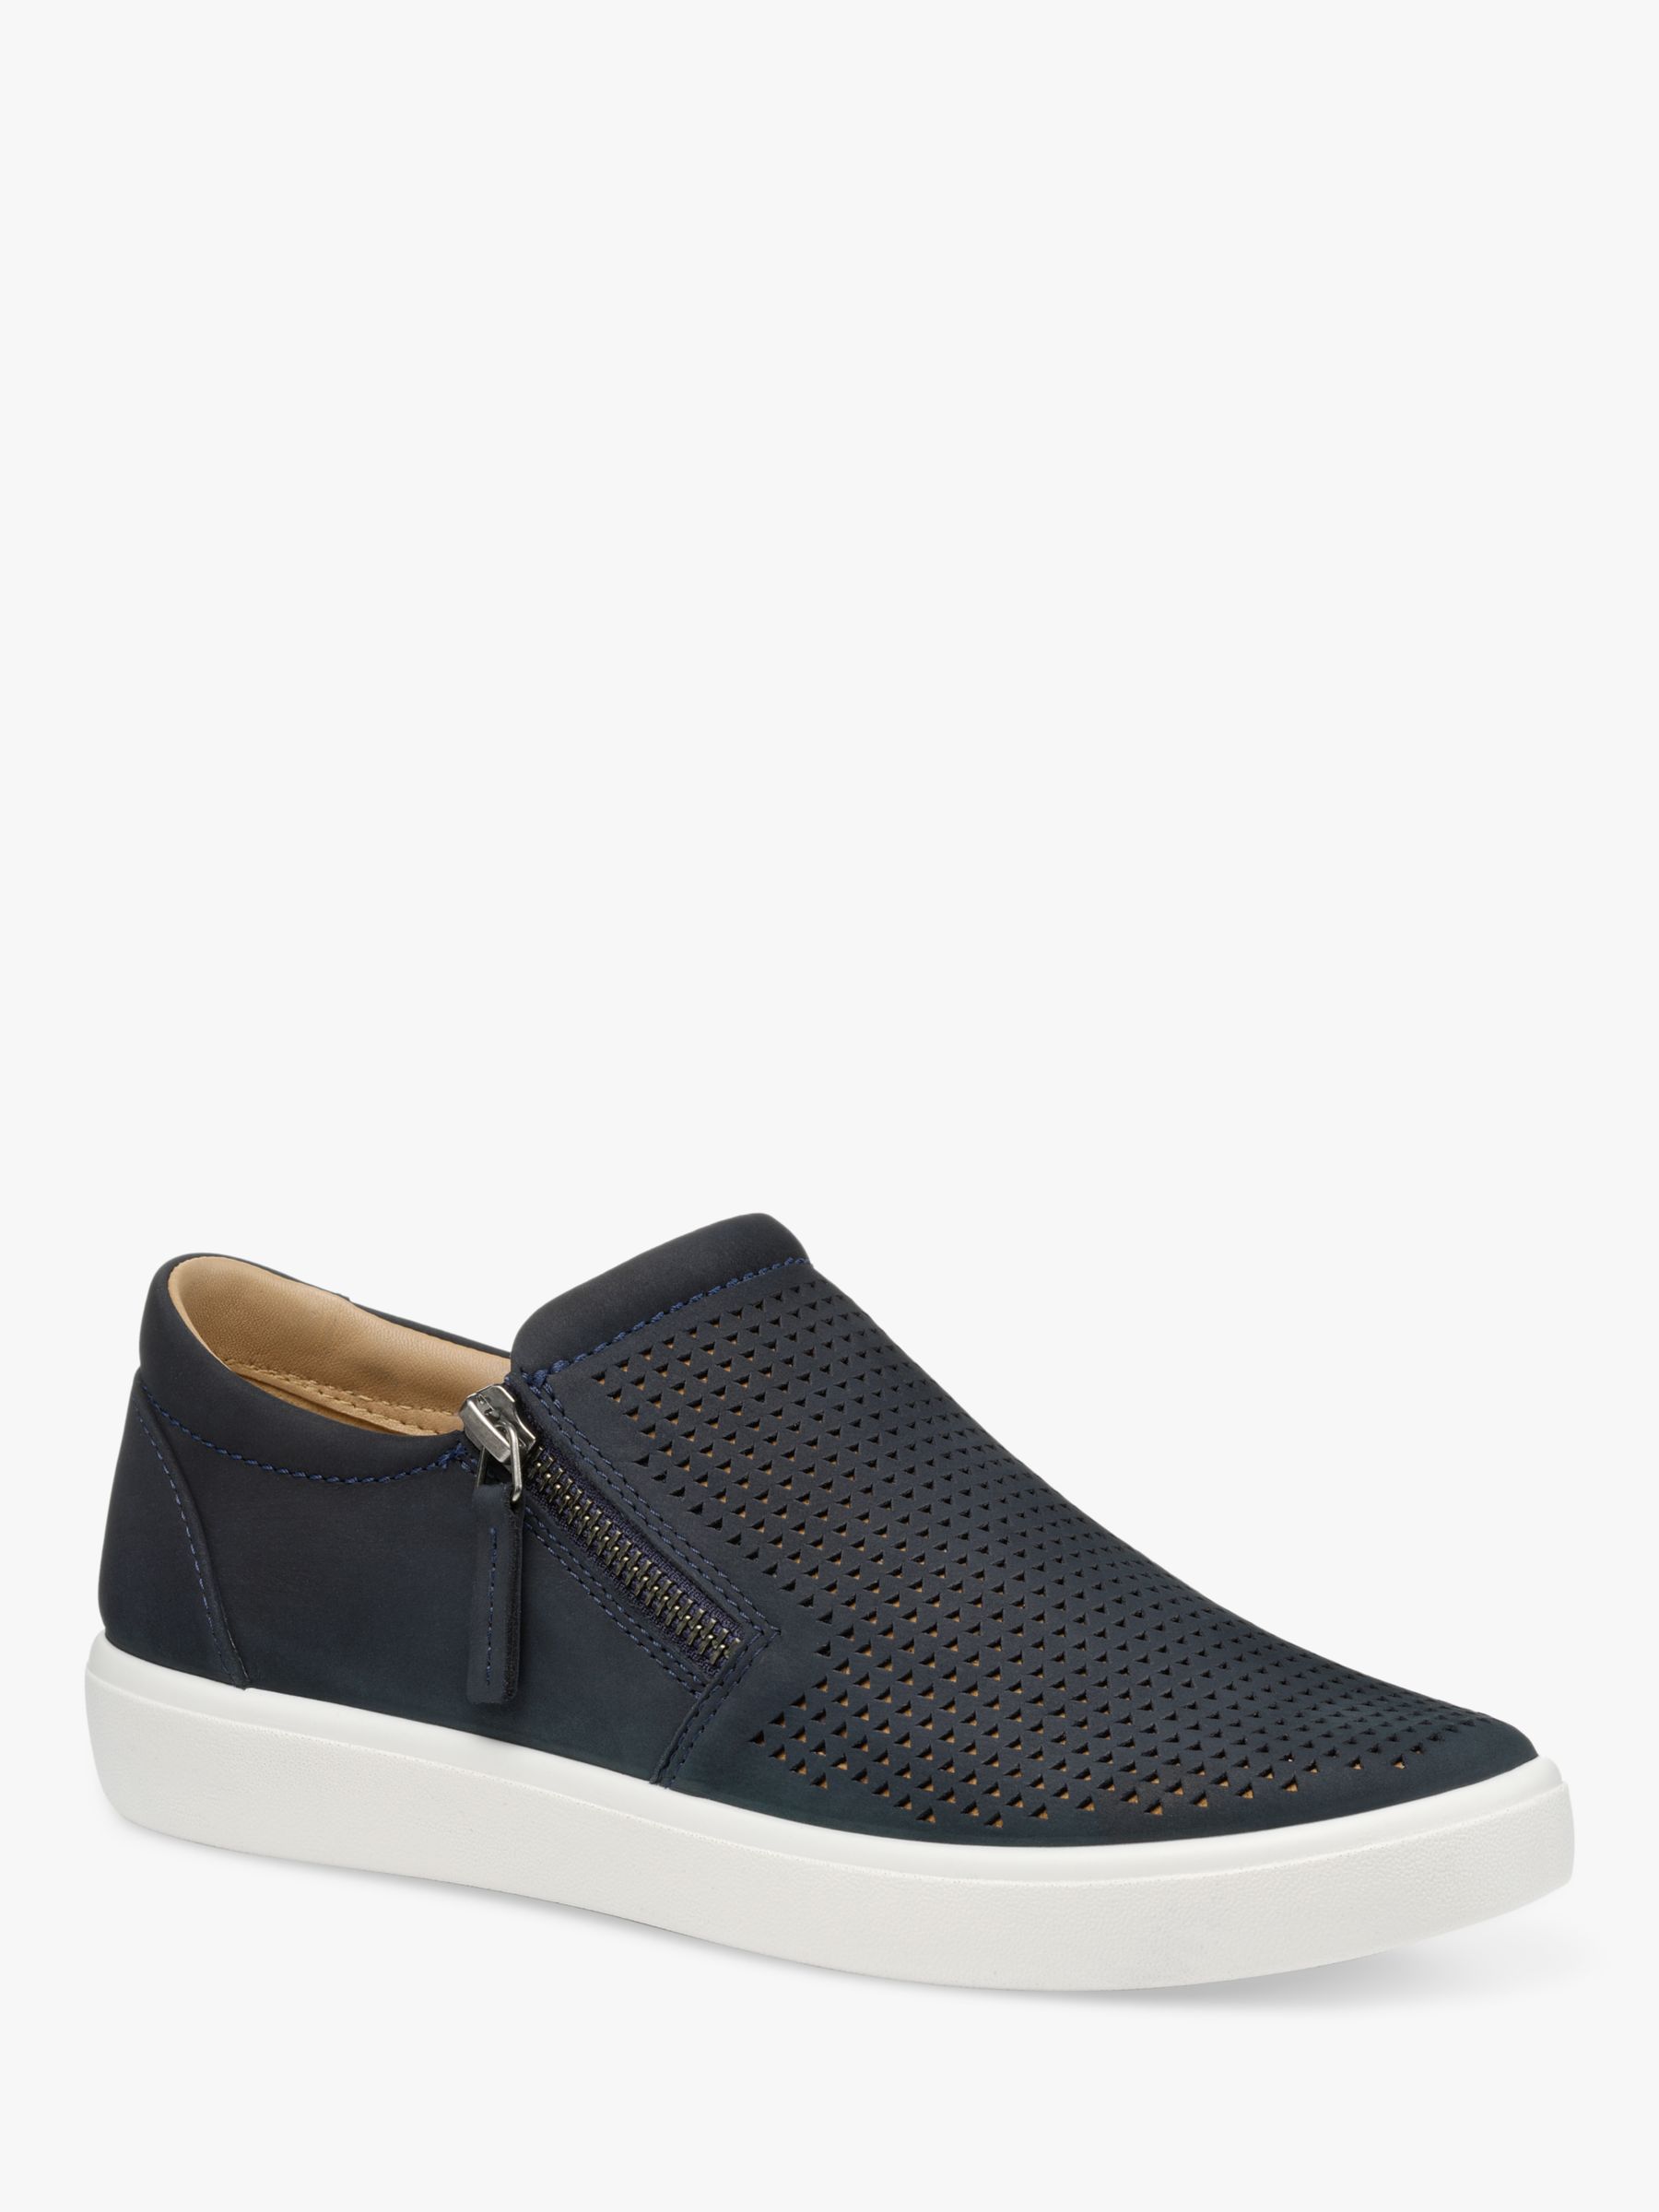 Buy Hotter Daisy Summer Deck Shoes Online at johnlewis.com